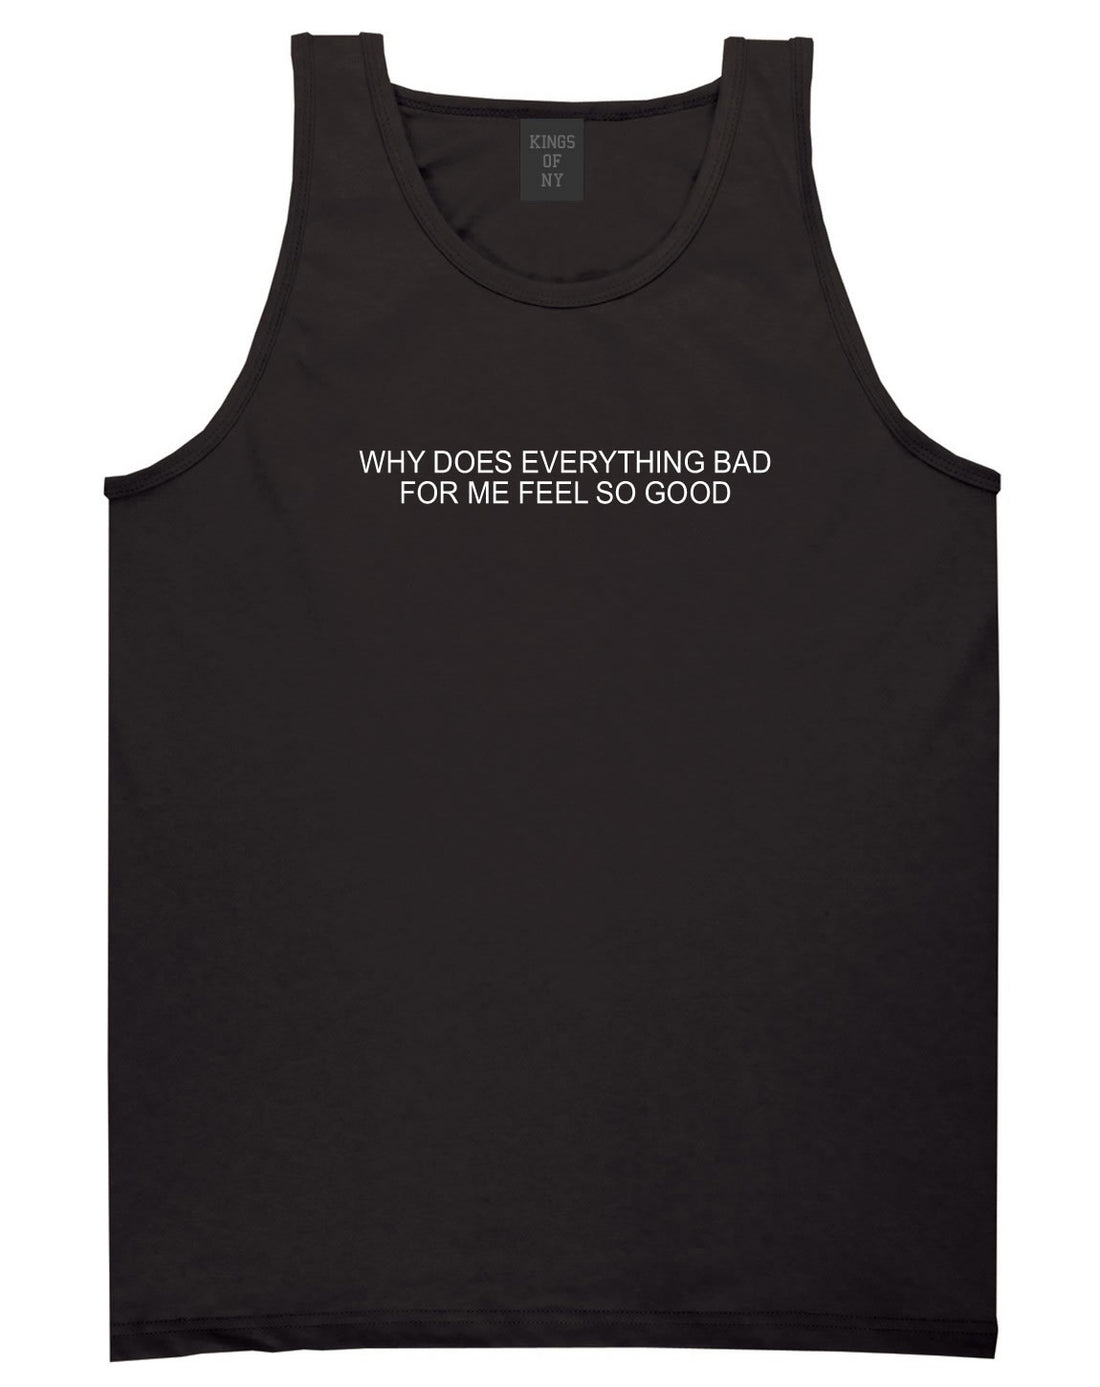 Why Does Everything Bad For Me Feel So Good Mens Tank Top Shirt Black